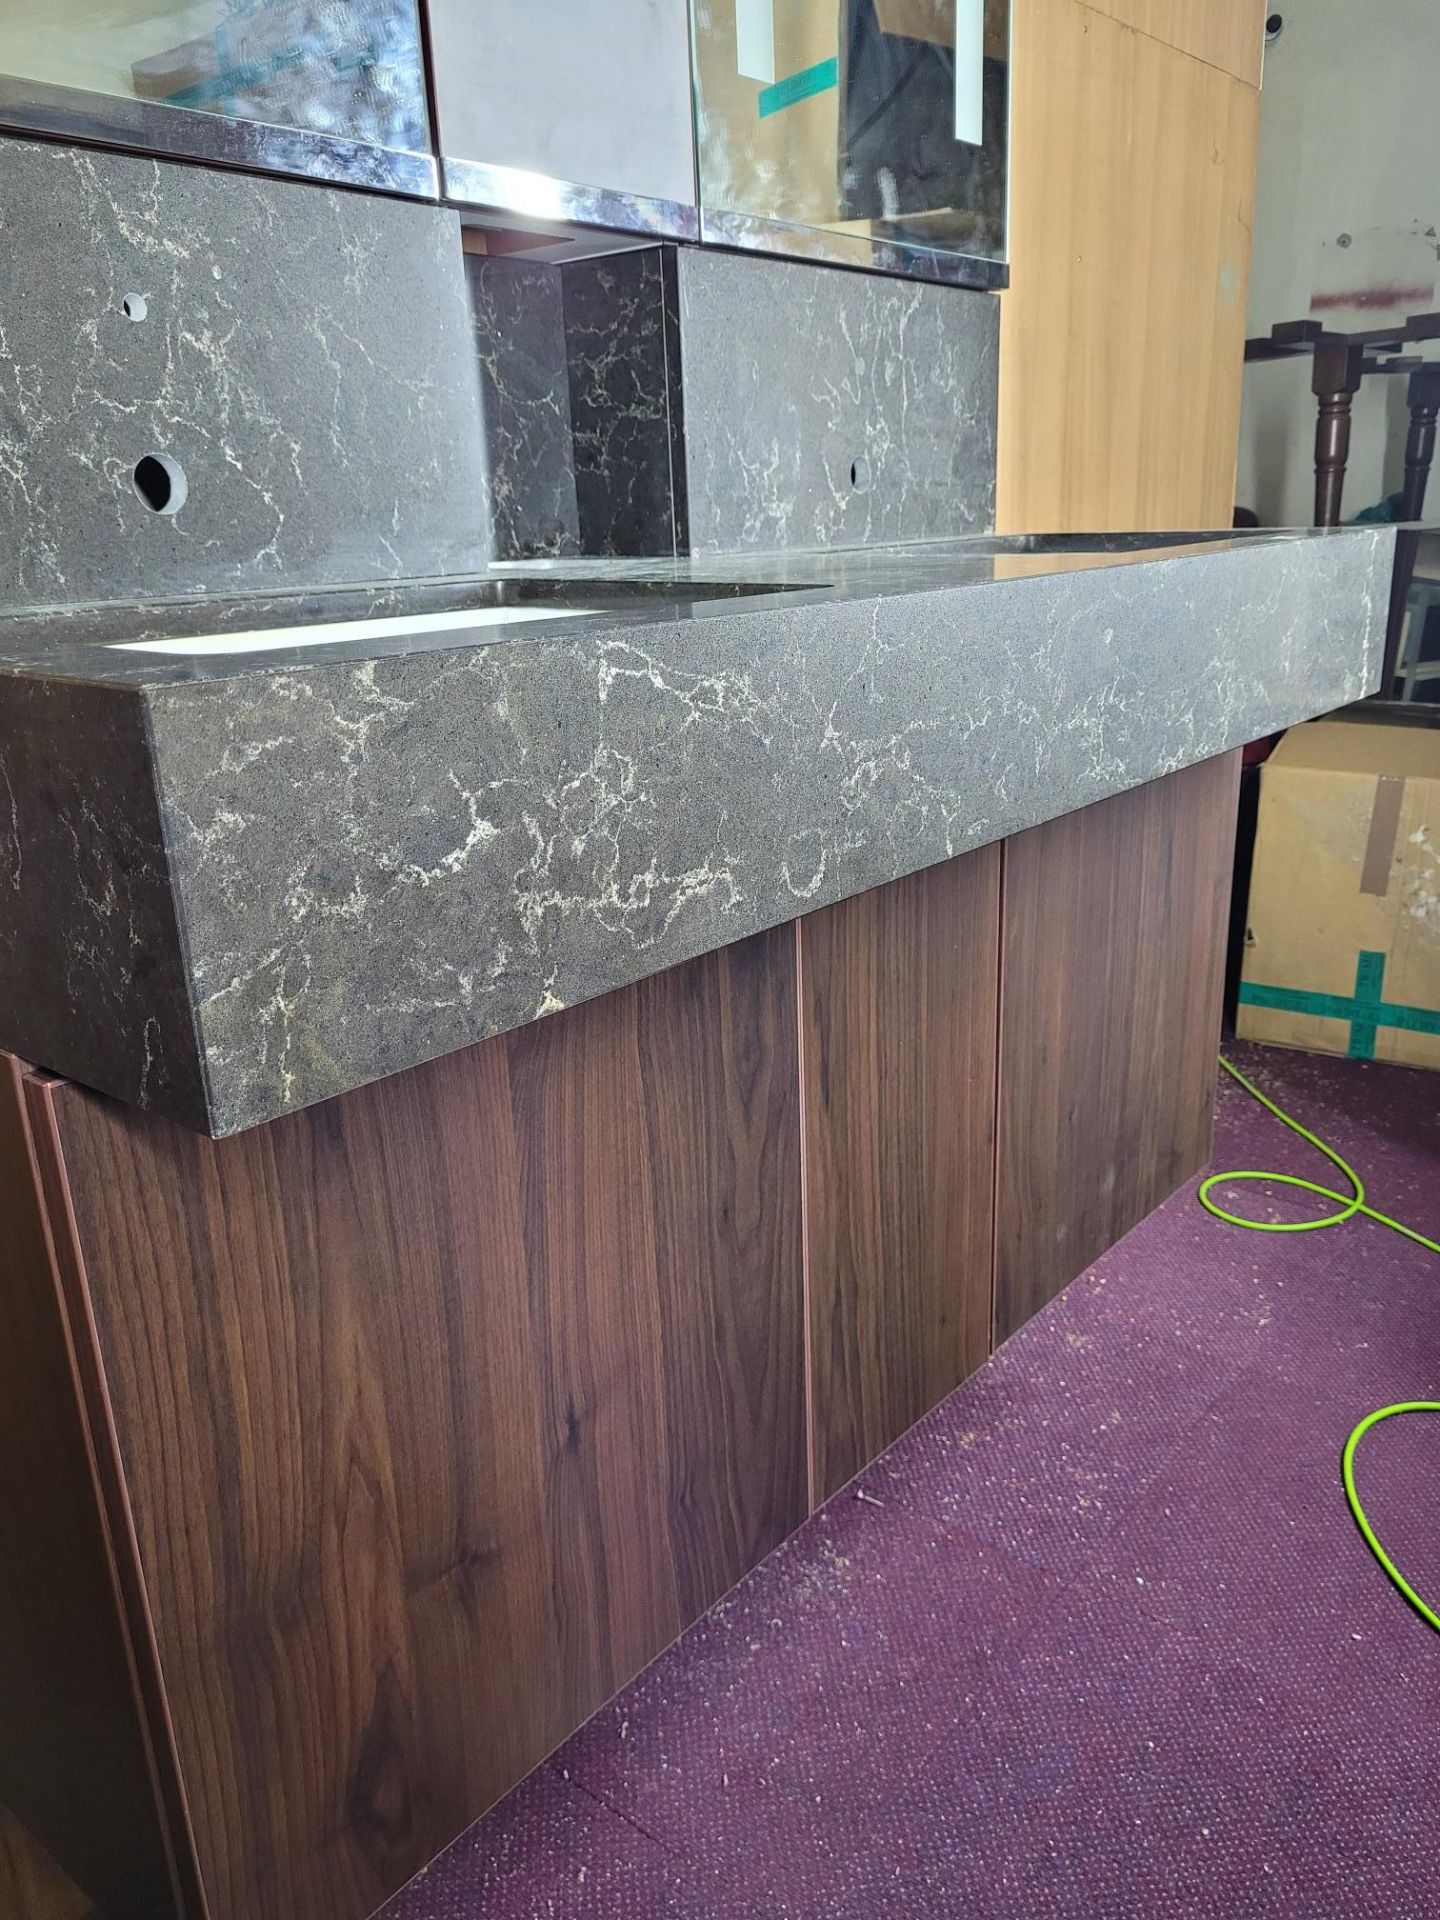 Bespoke twin basin black variegated granite bathroom sink unit, with mirrored cabinets, - Image 3 of 11